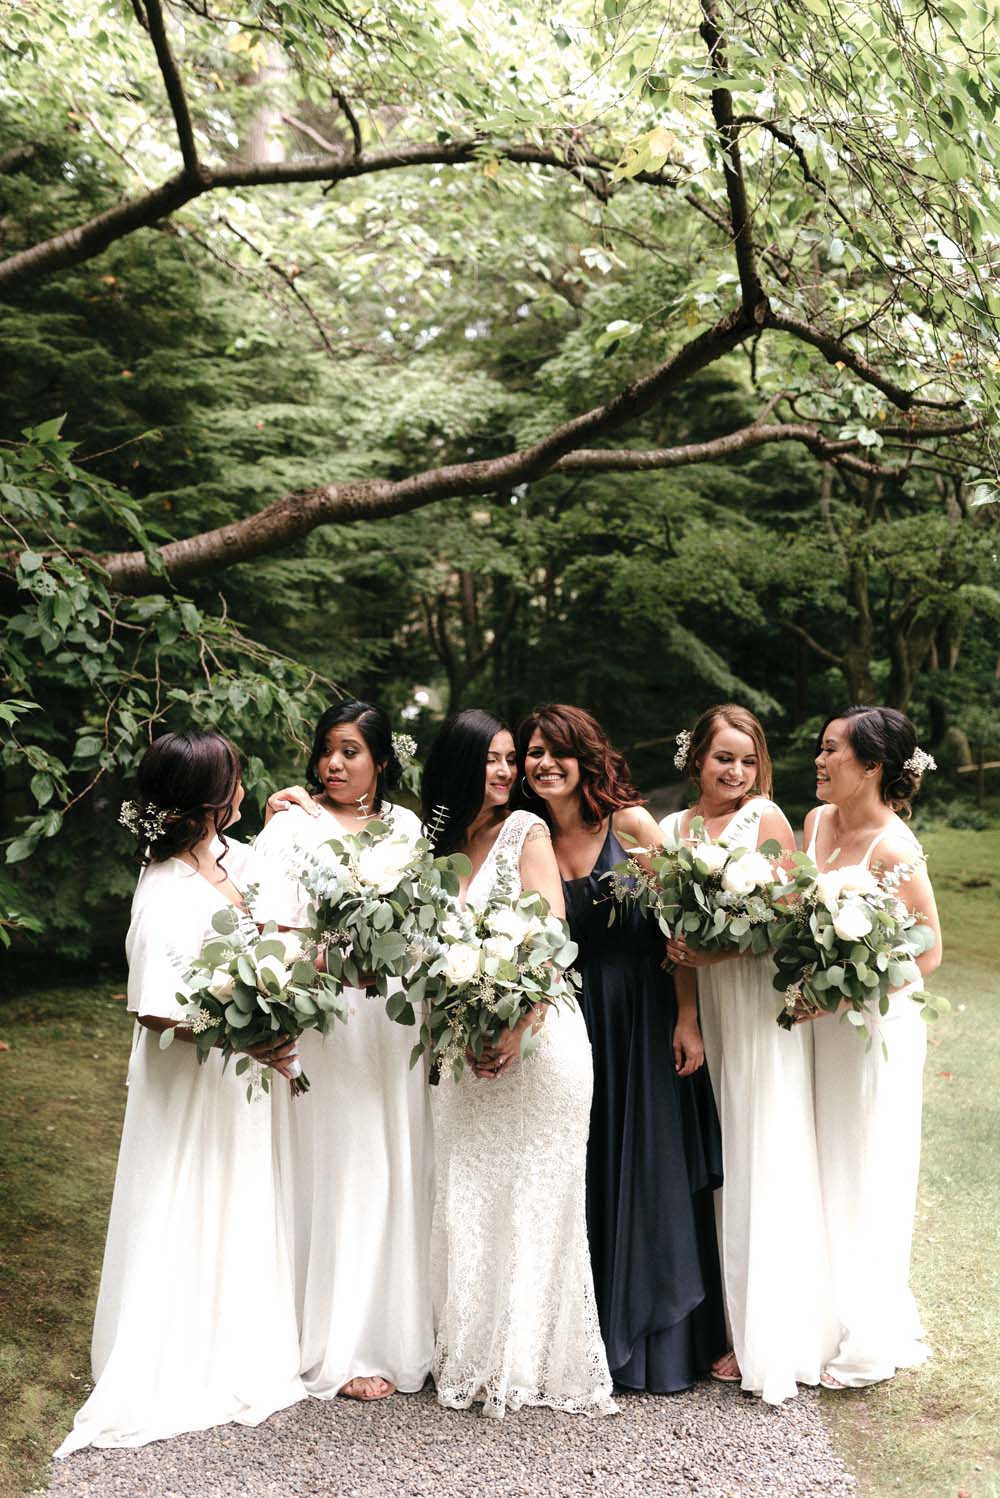 A Multicultural Wedding At The UBC Botanical Garden in Vancouver - bride and bridesmaids